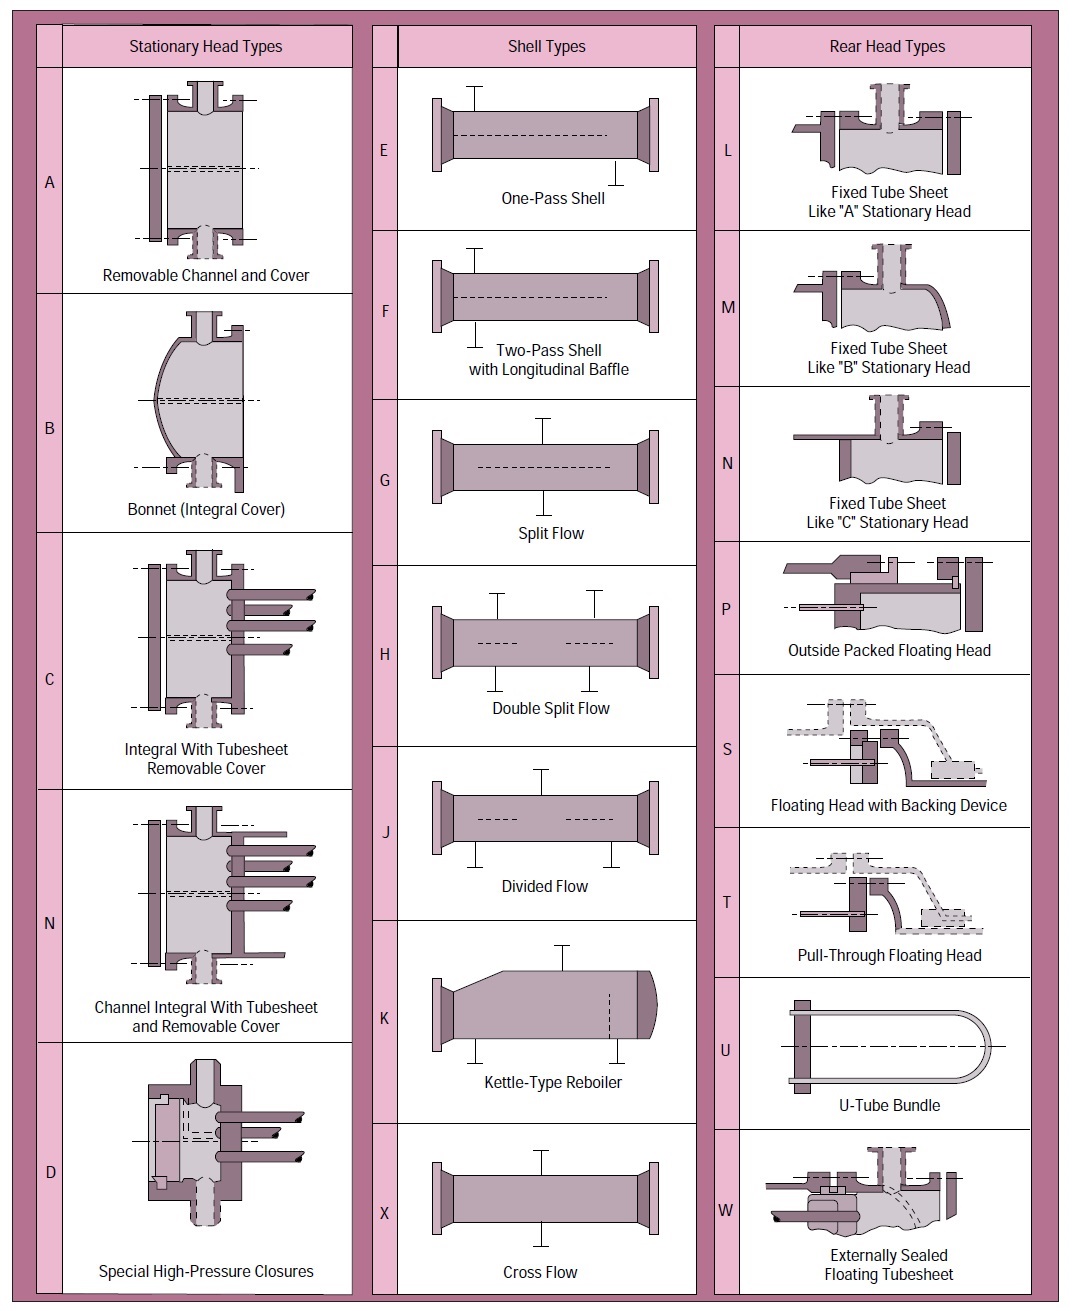 Selection of Shell & Tube Heat Exchangers | TEMA Types ...